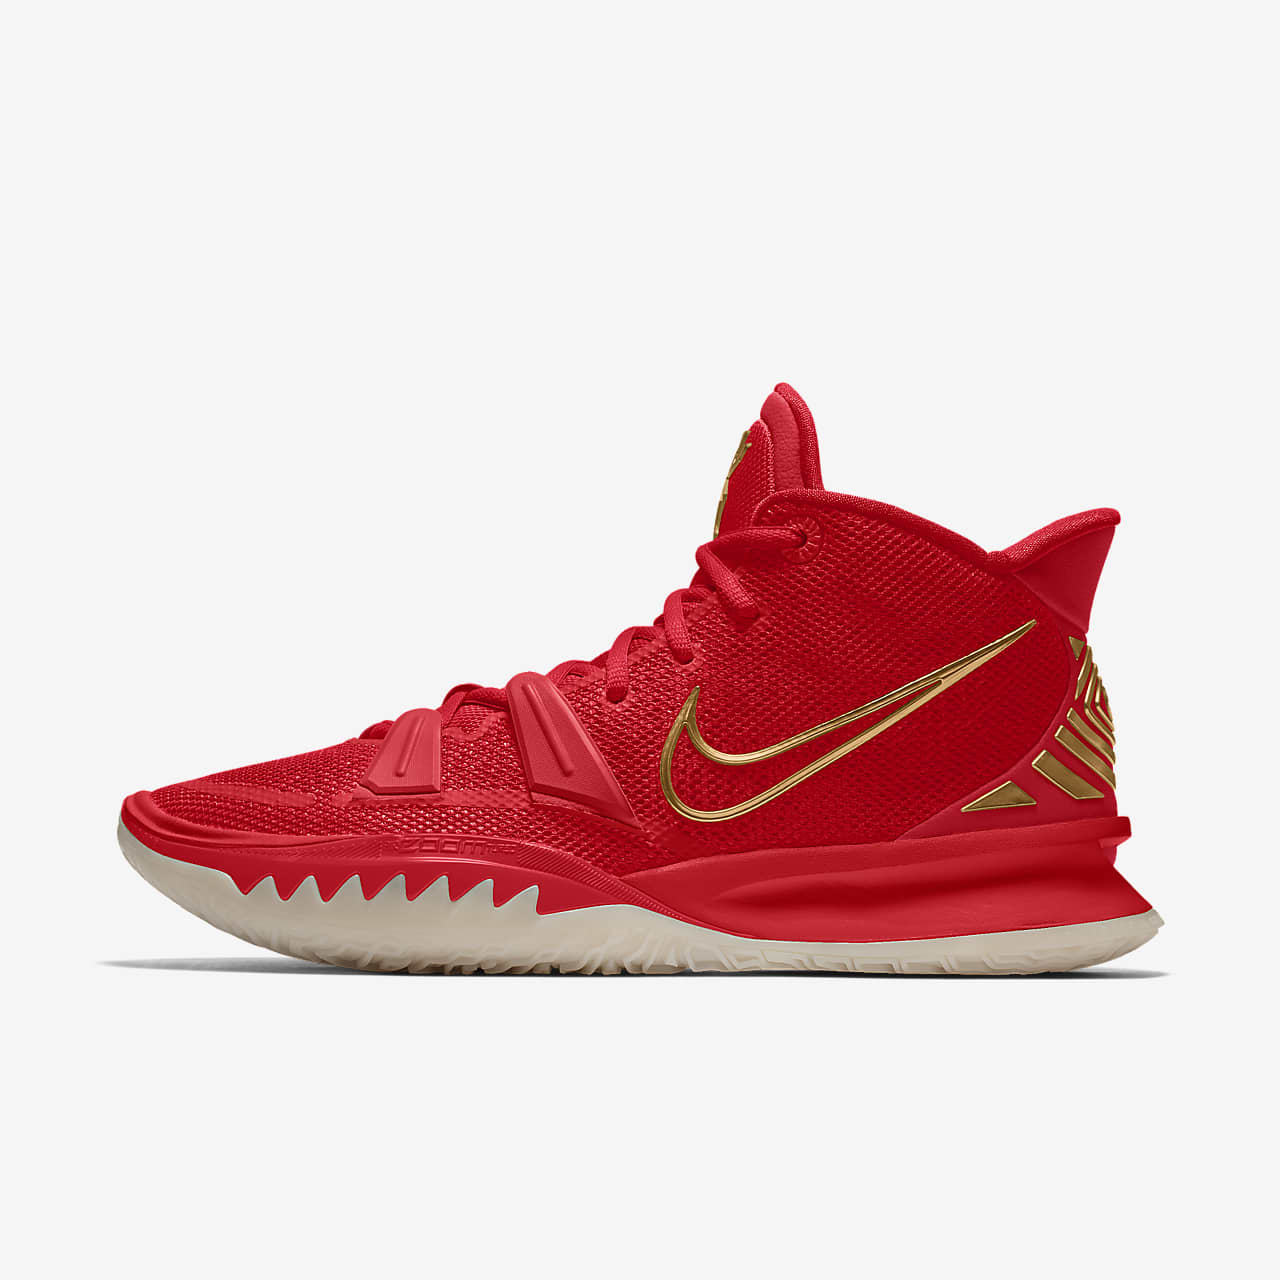 Kyrie 7 By You personalisierbarer Basketballschuh